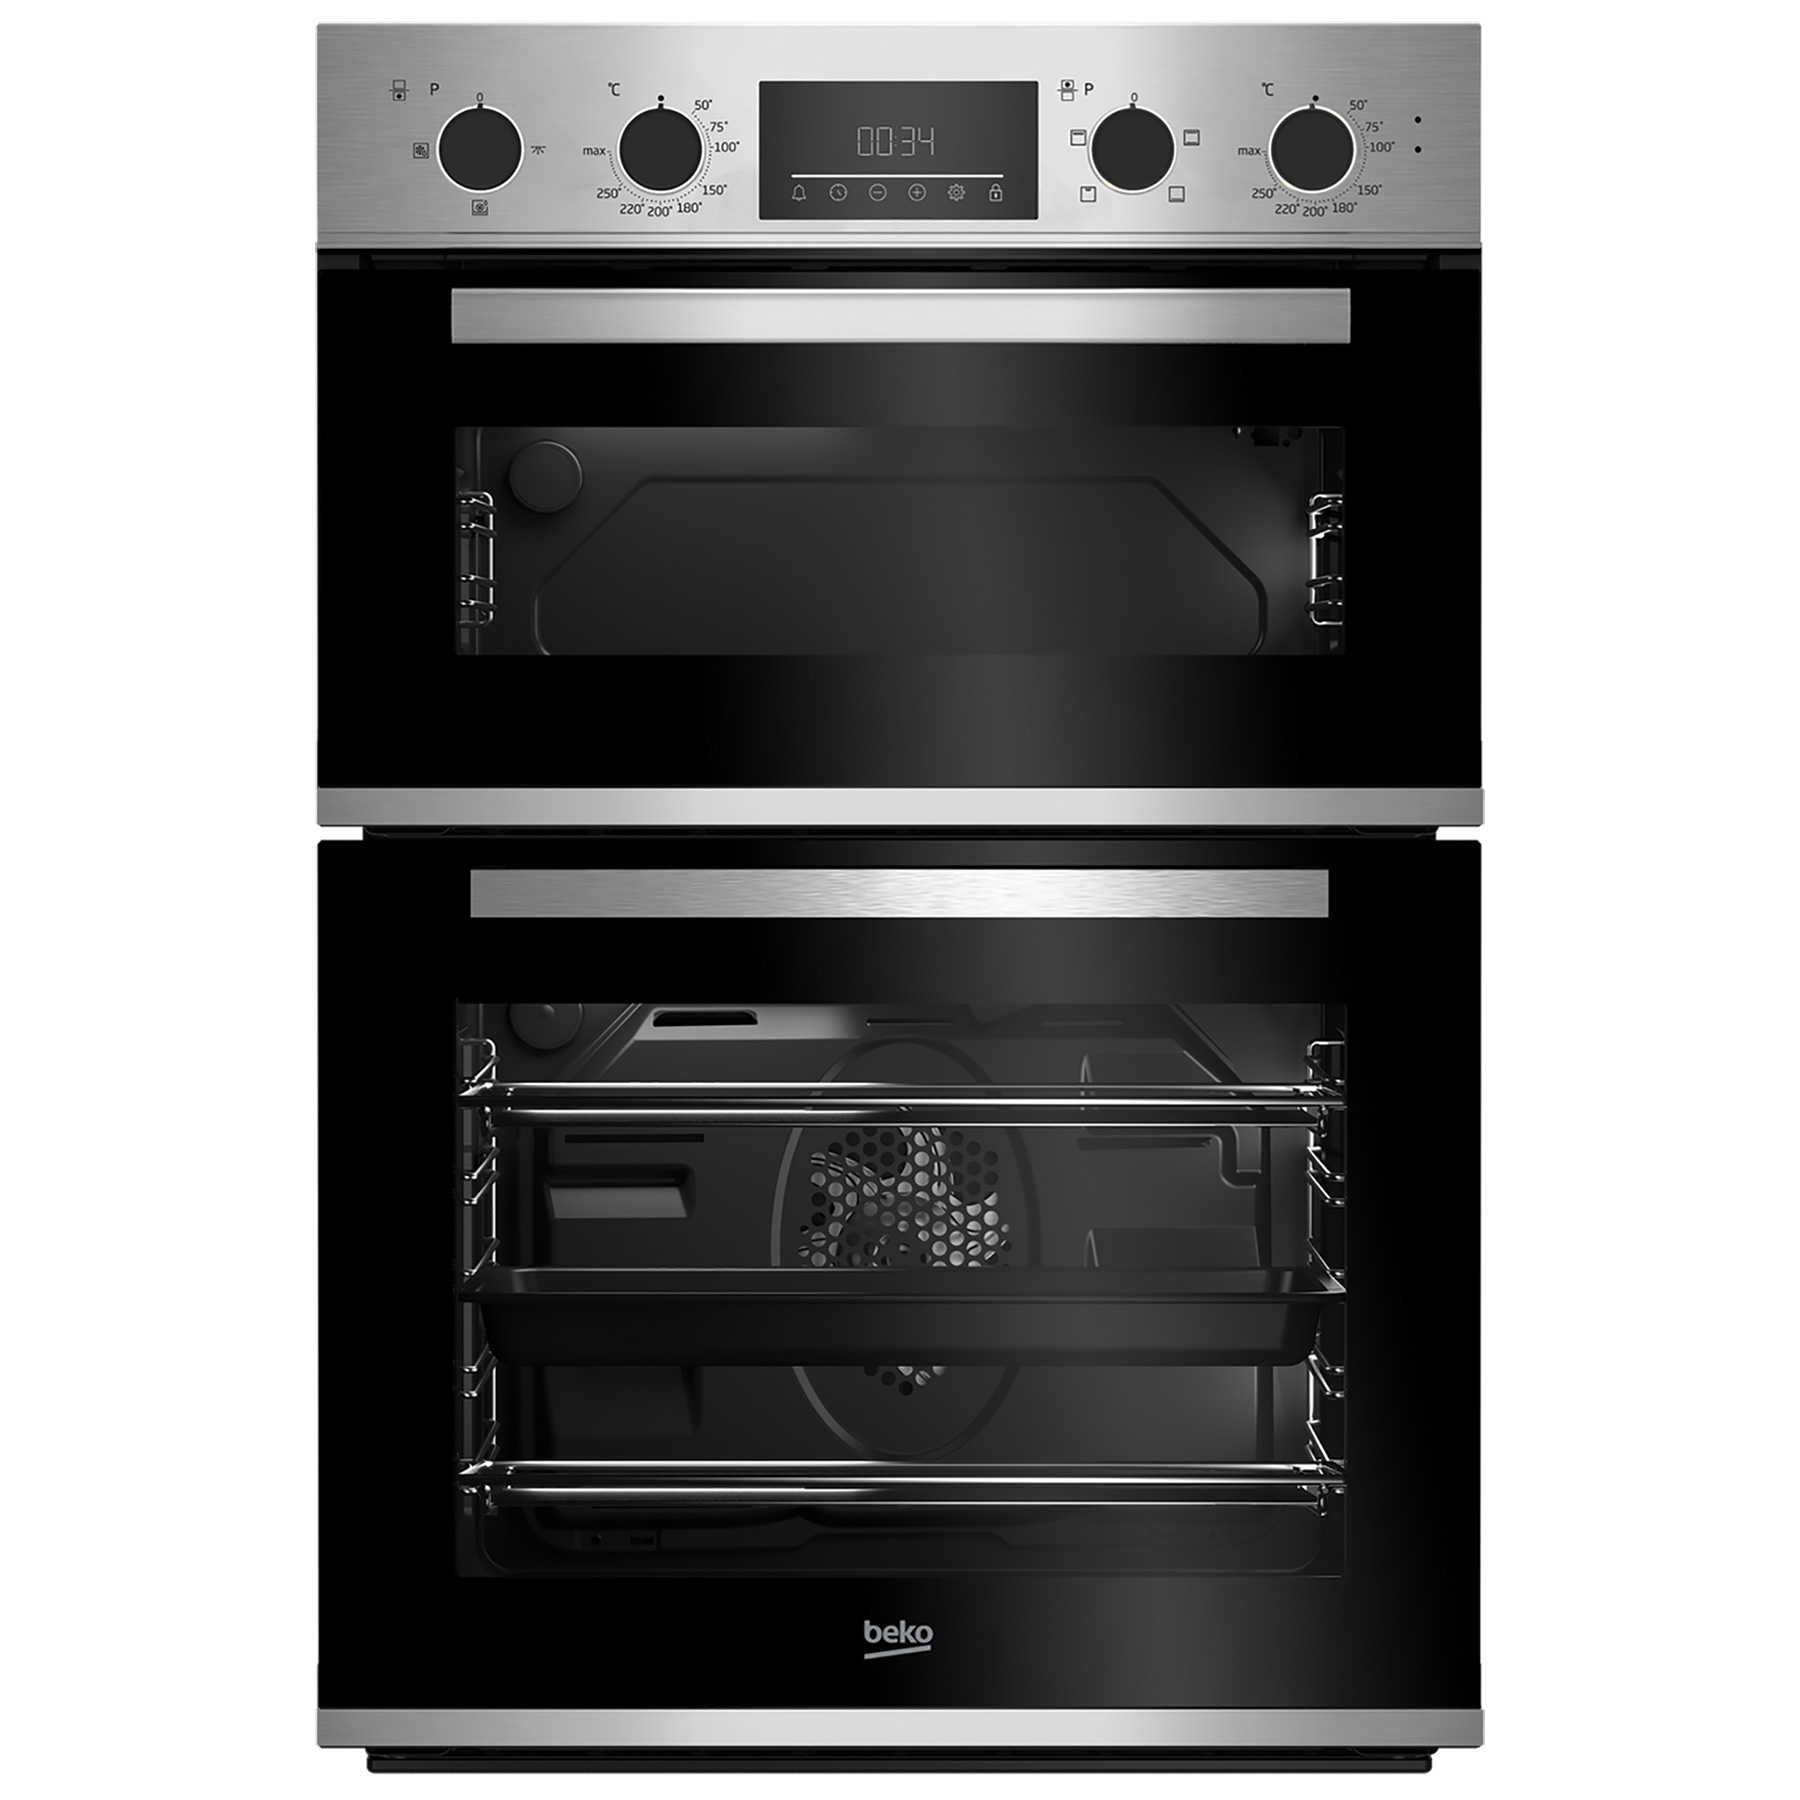 Beko CDFY22309X Built In Electric Double Oven in St Steel A Rated